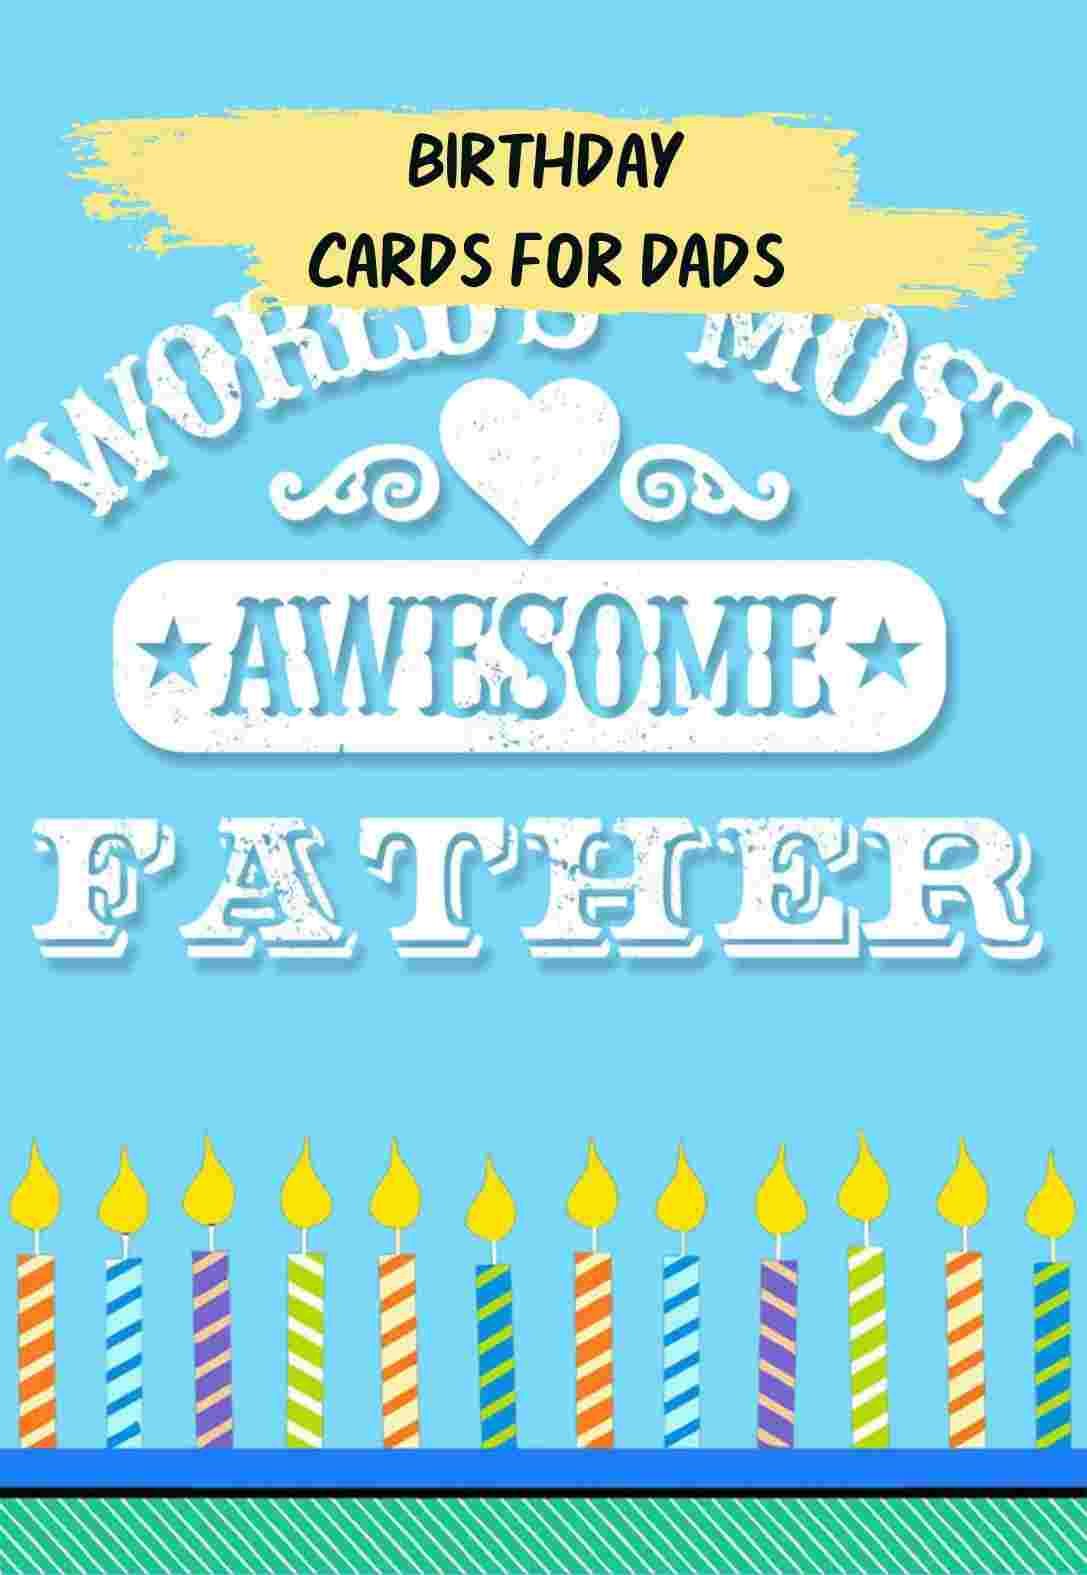 Birthday Cards for Dads